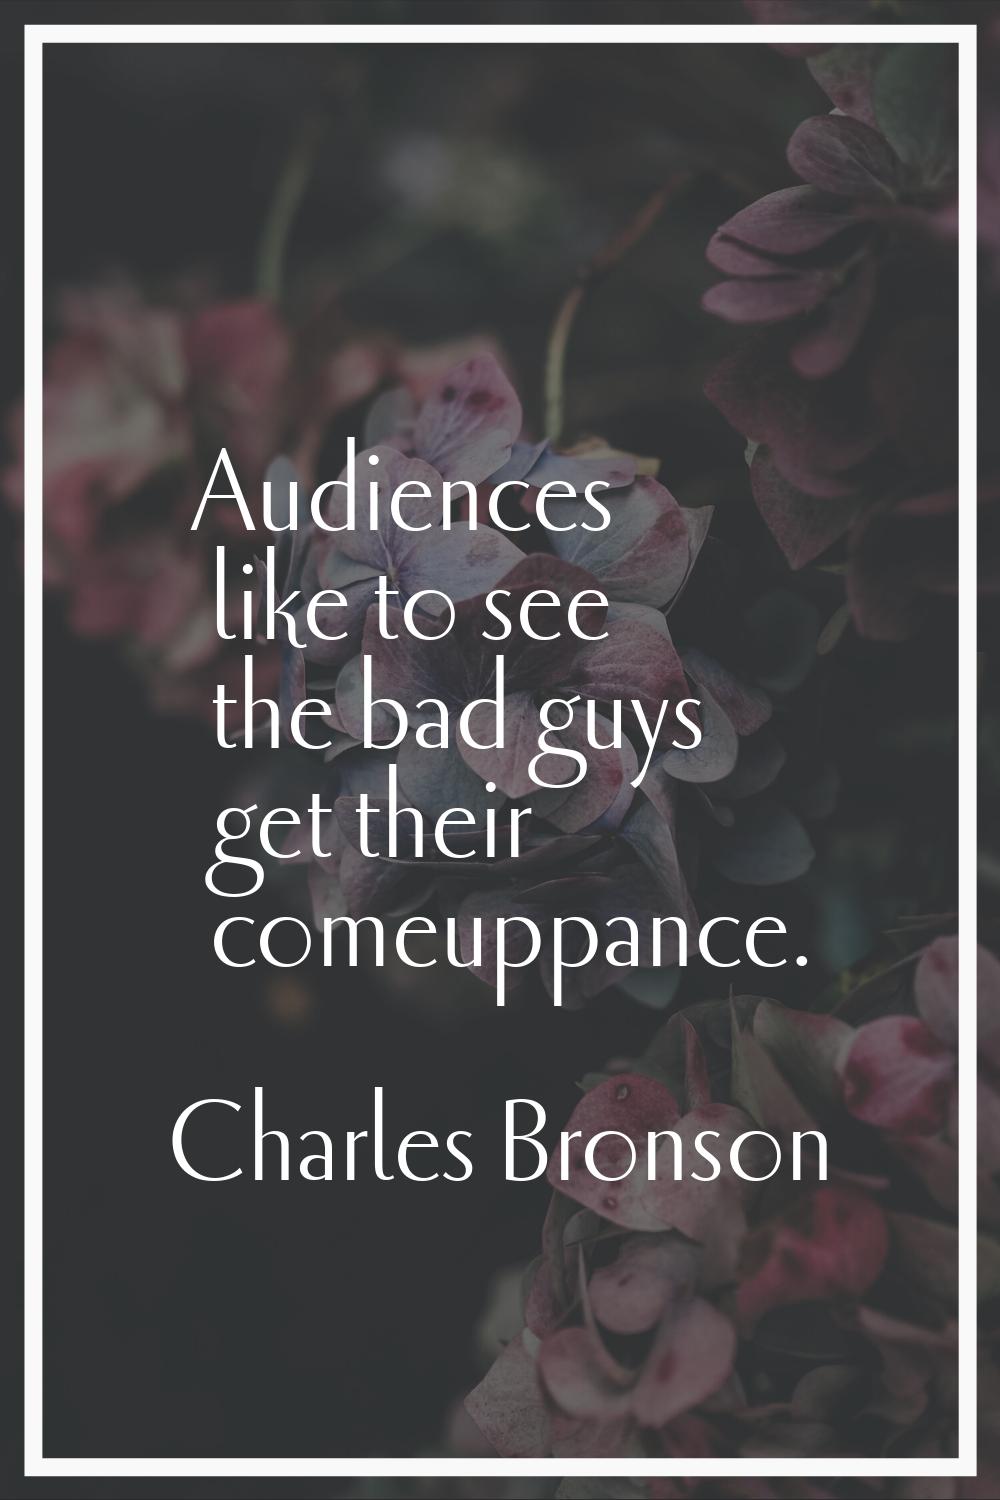 Audiences like to see the bad guys get their comeuppance.